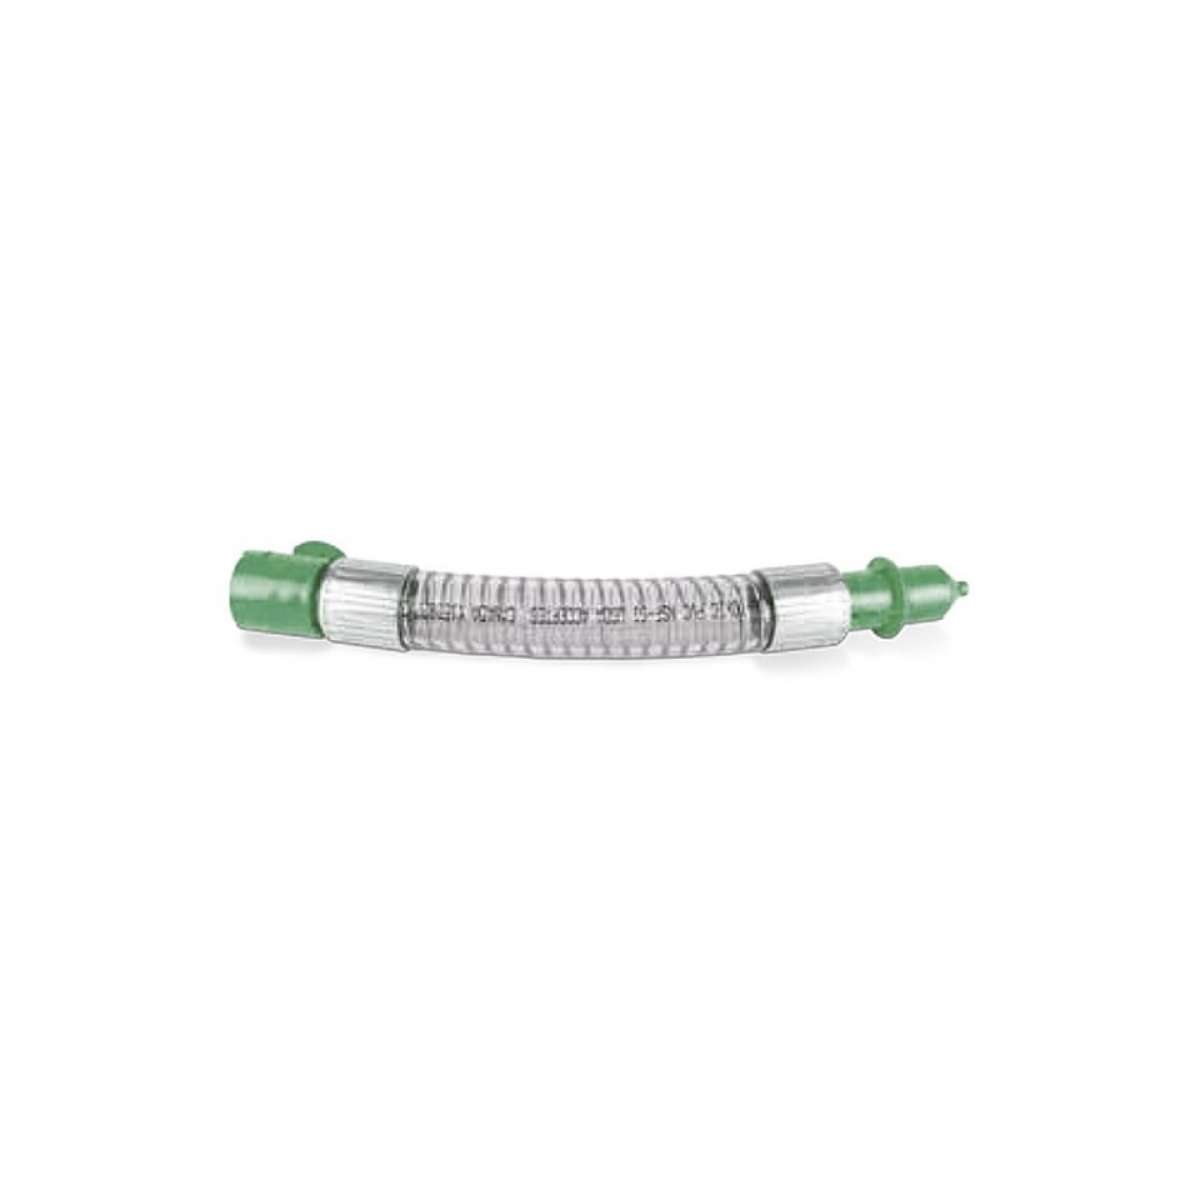 IsoLink 16" Extended Spout with 1/4" Tip - Dark Green